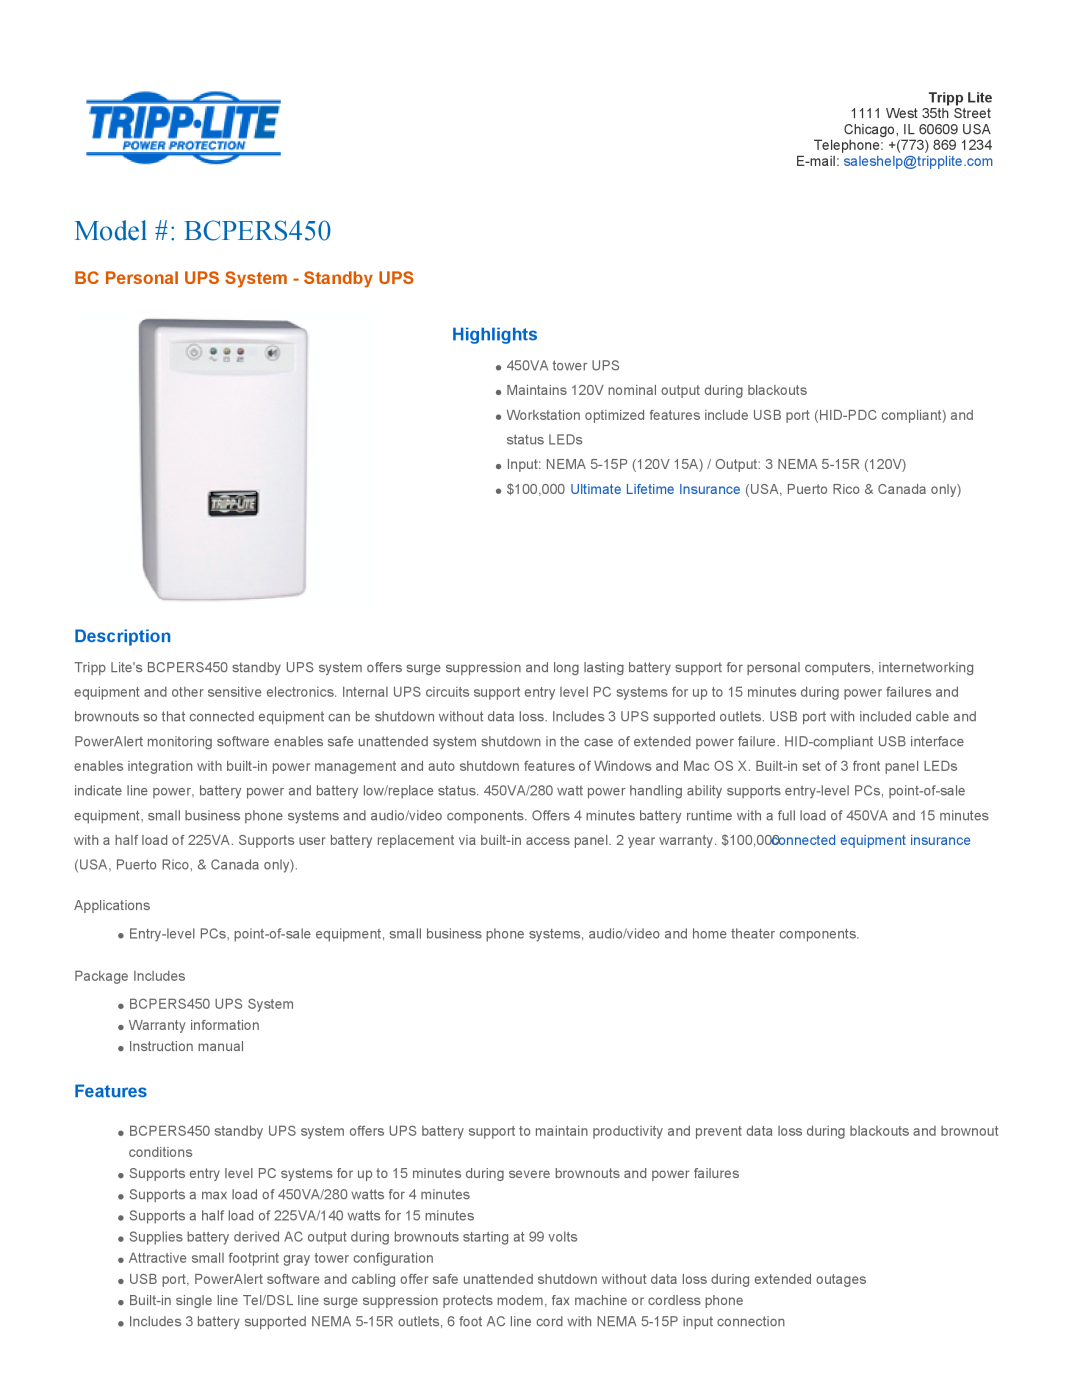 Tripp Lite warranty Highlights, Description, Features, Model # BCPERS450, BC Personal UPS System - Standby UPS 